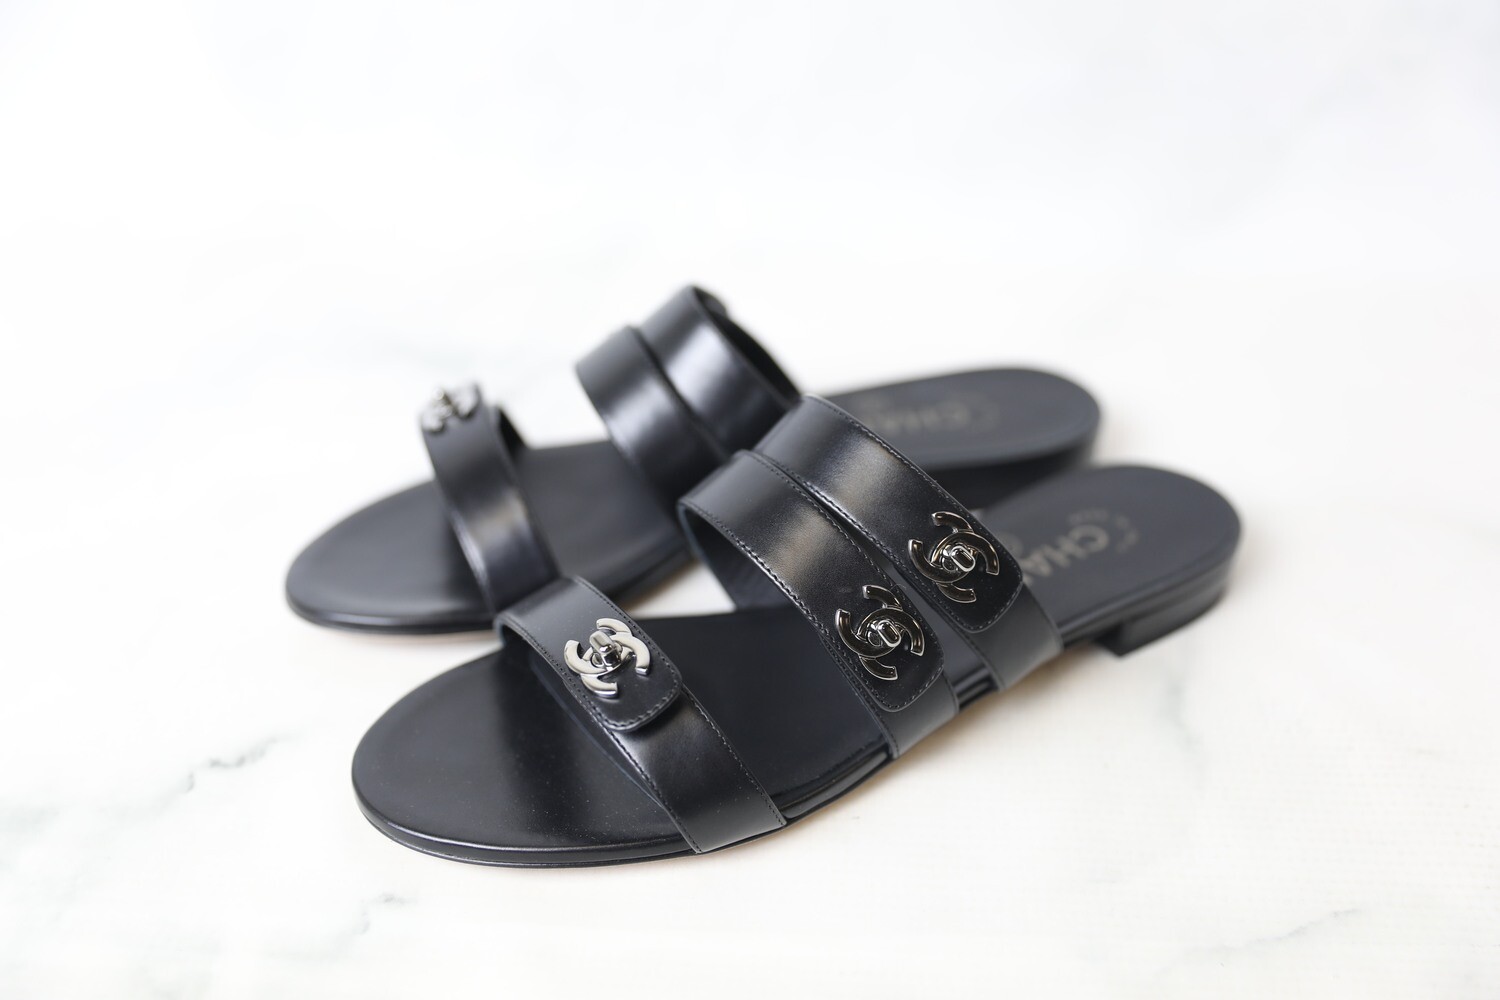 Chanel Shoes Black Strappy Cc Logo Lock Slippers Mules Sandals, New in Box  WA001